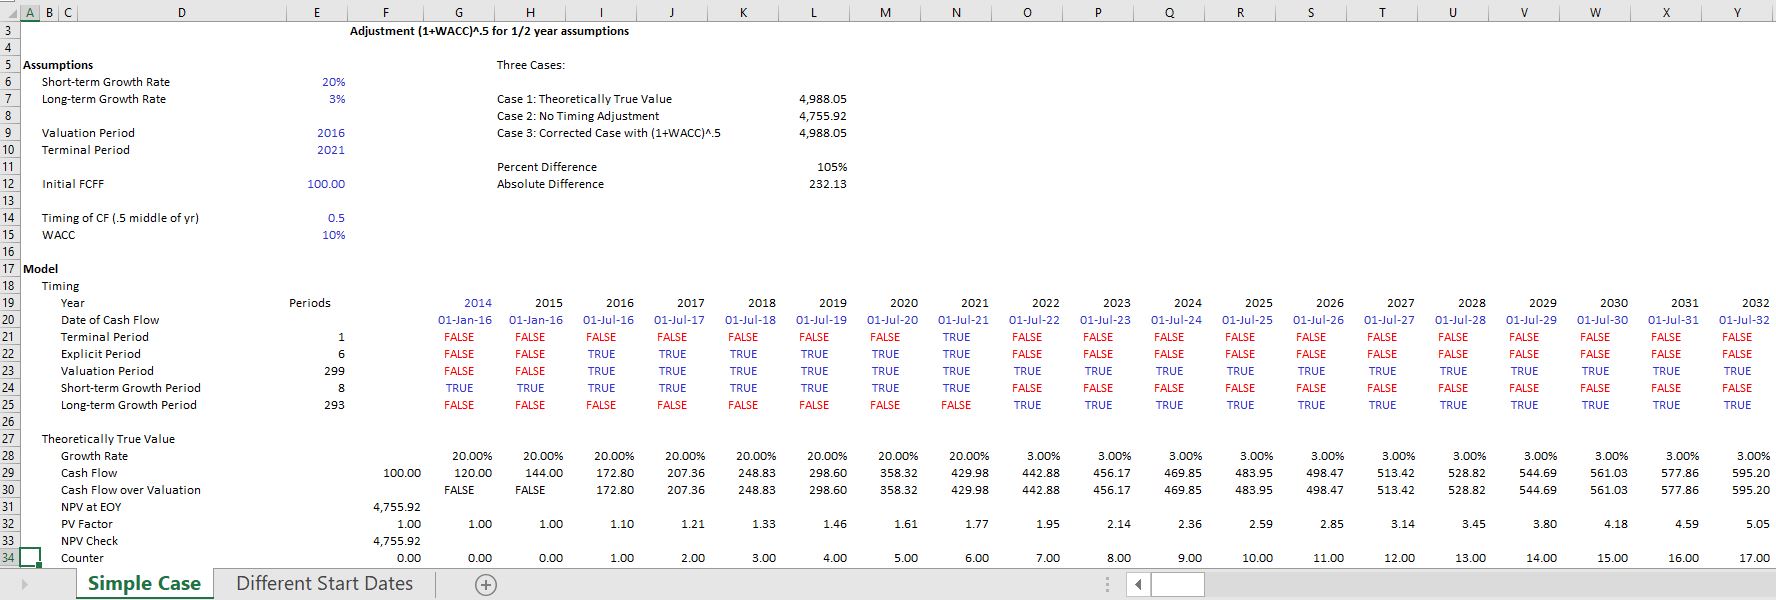 Partial Year Discounting and Timing in DCF Analysis – Edward